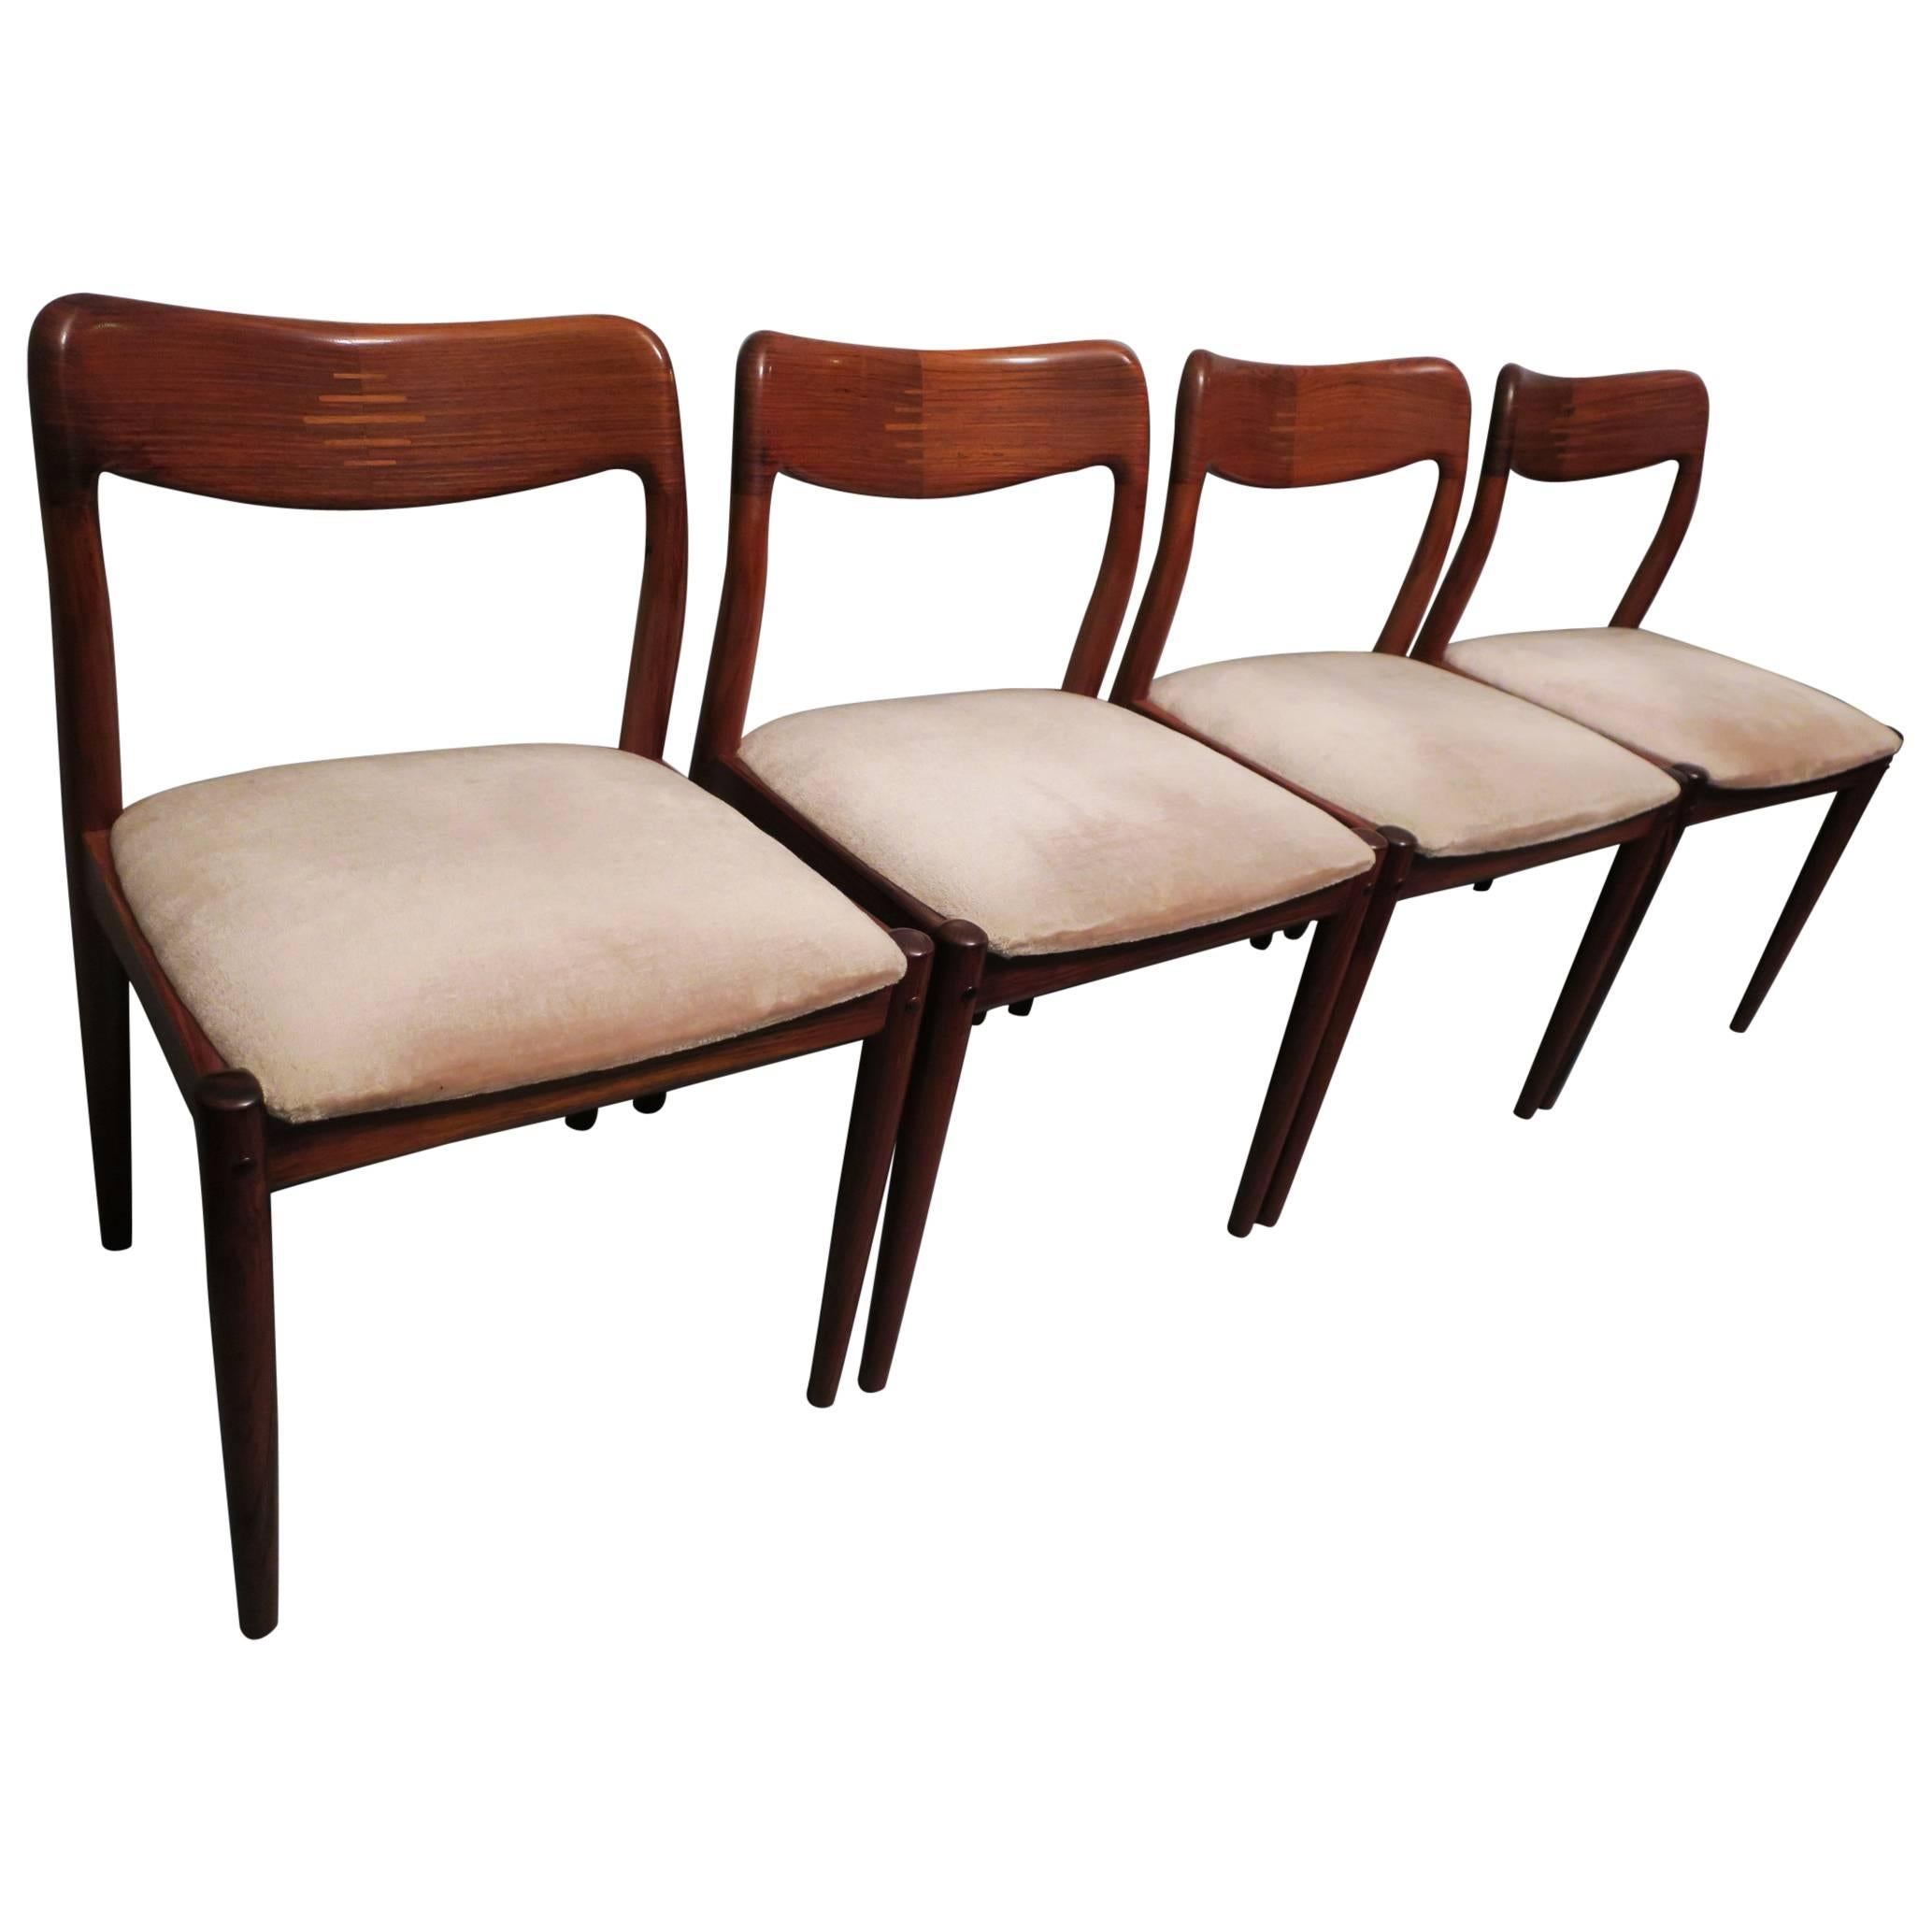 Set of Four Rosewood Inlaid Dining Chairs, Denmark, 1960s For Sale